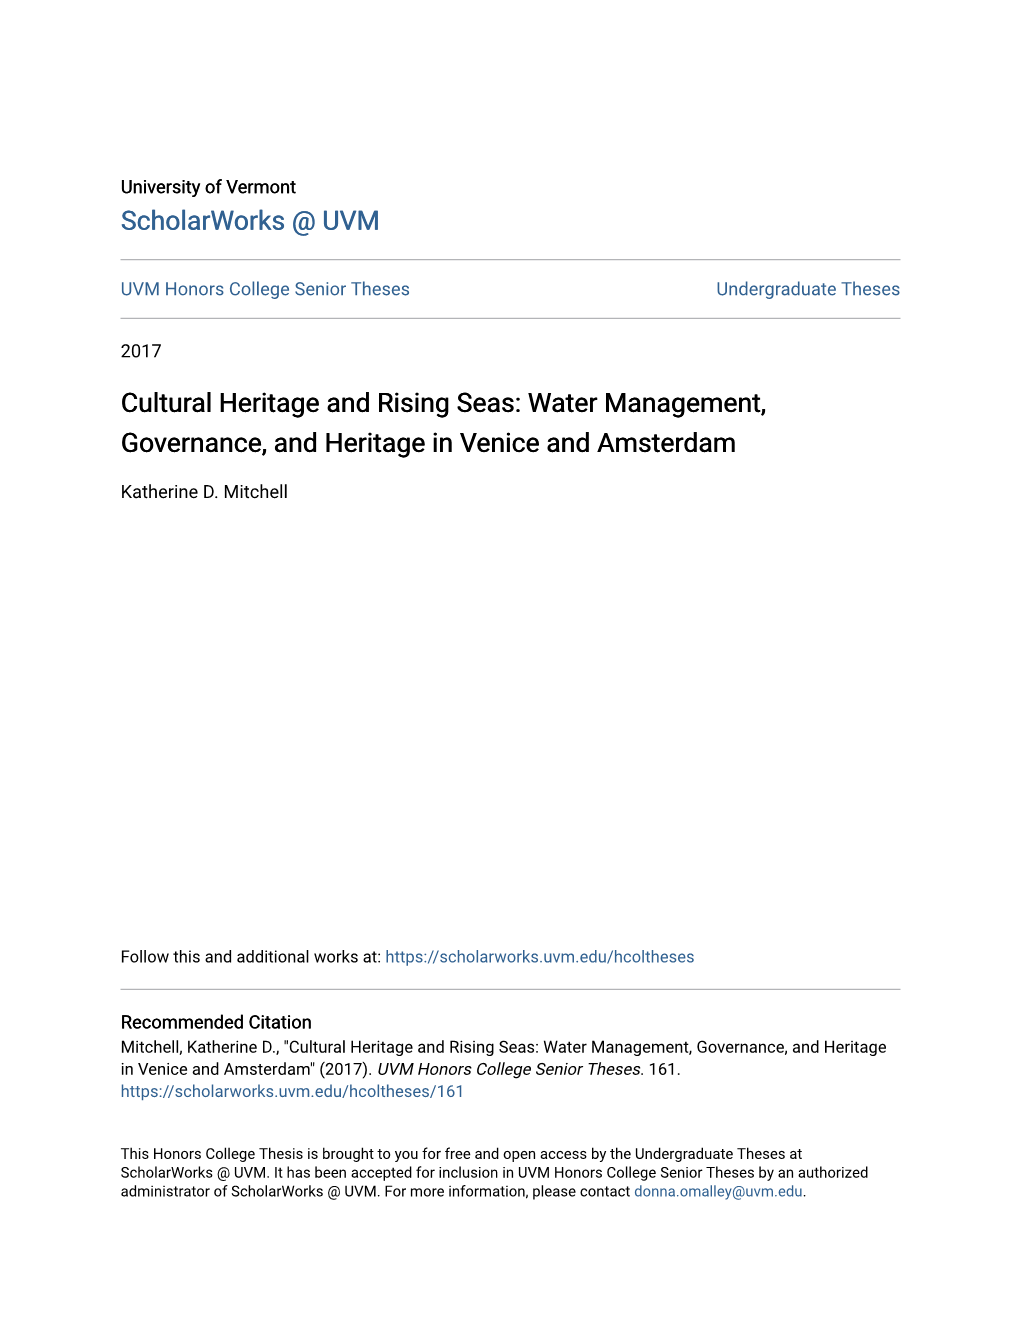 Water Management, Governance, and Heritage in Venice and Amsterdam